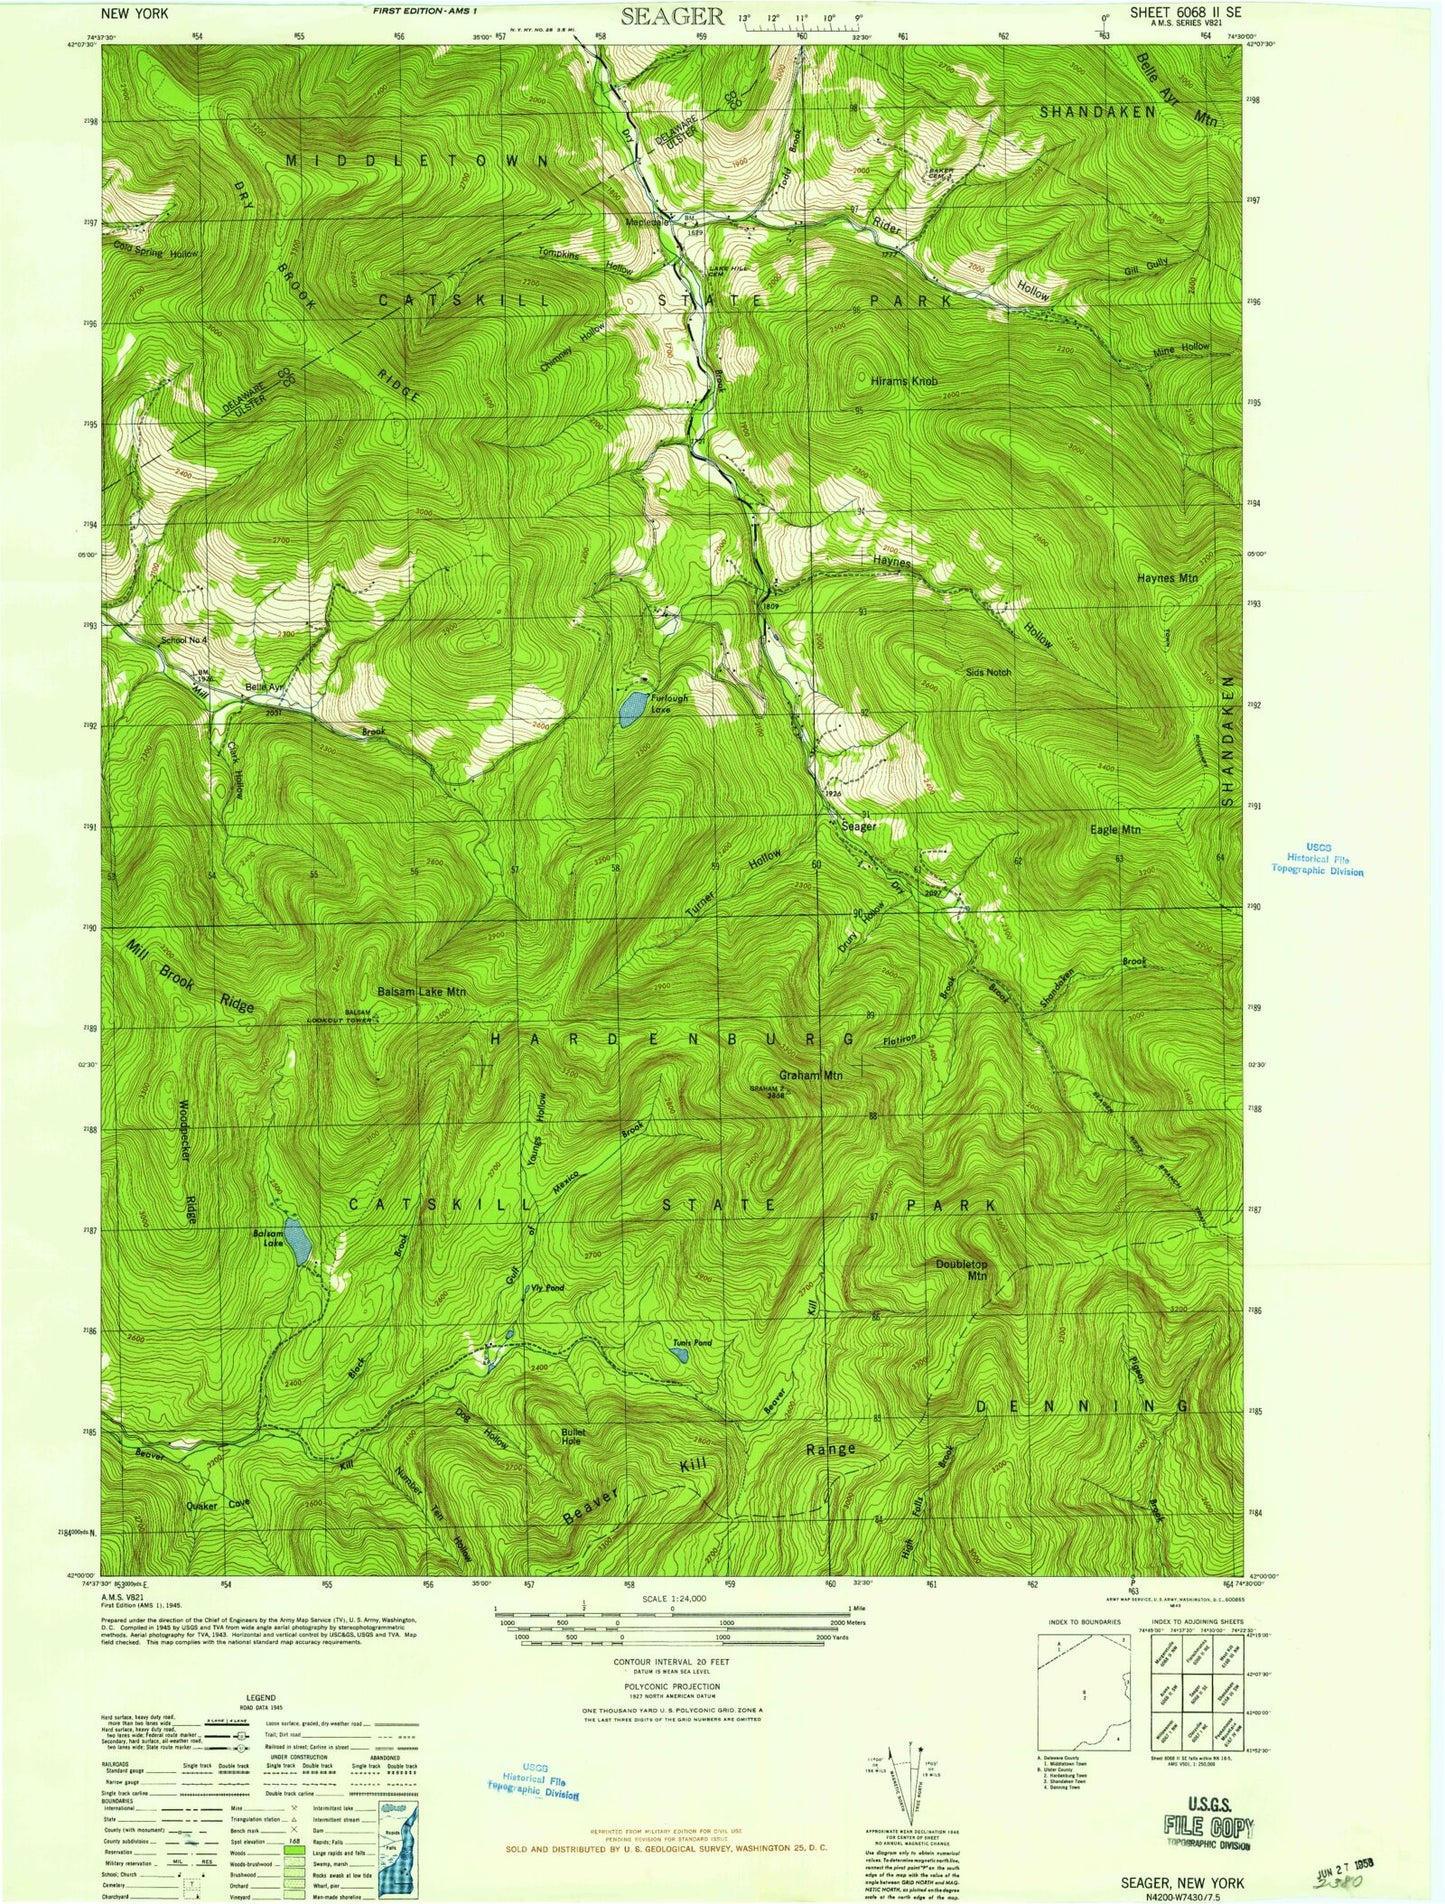 Classic USGS Seager New York 7.5'x7.5' Topo Map Image